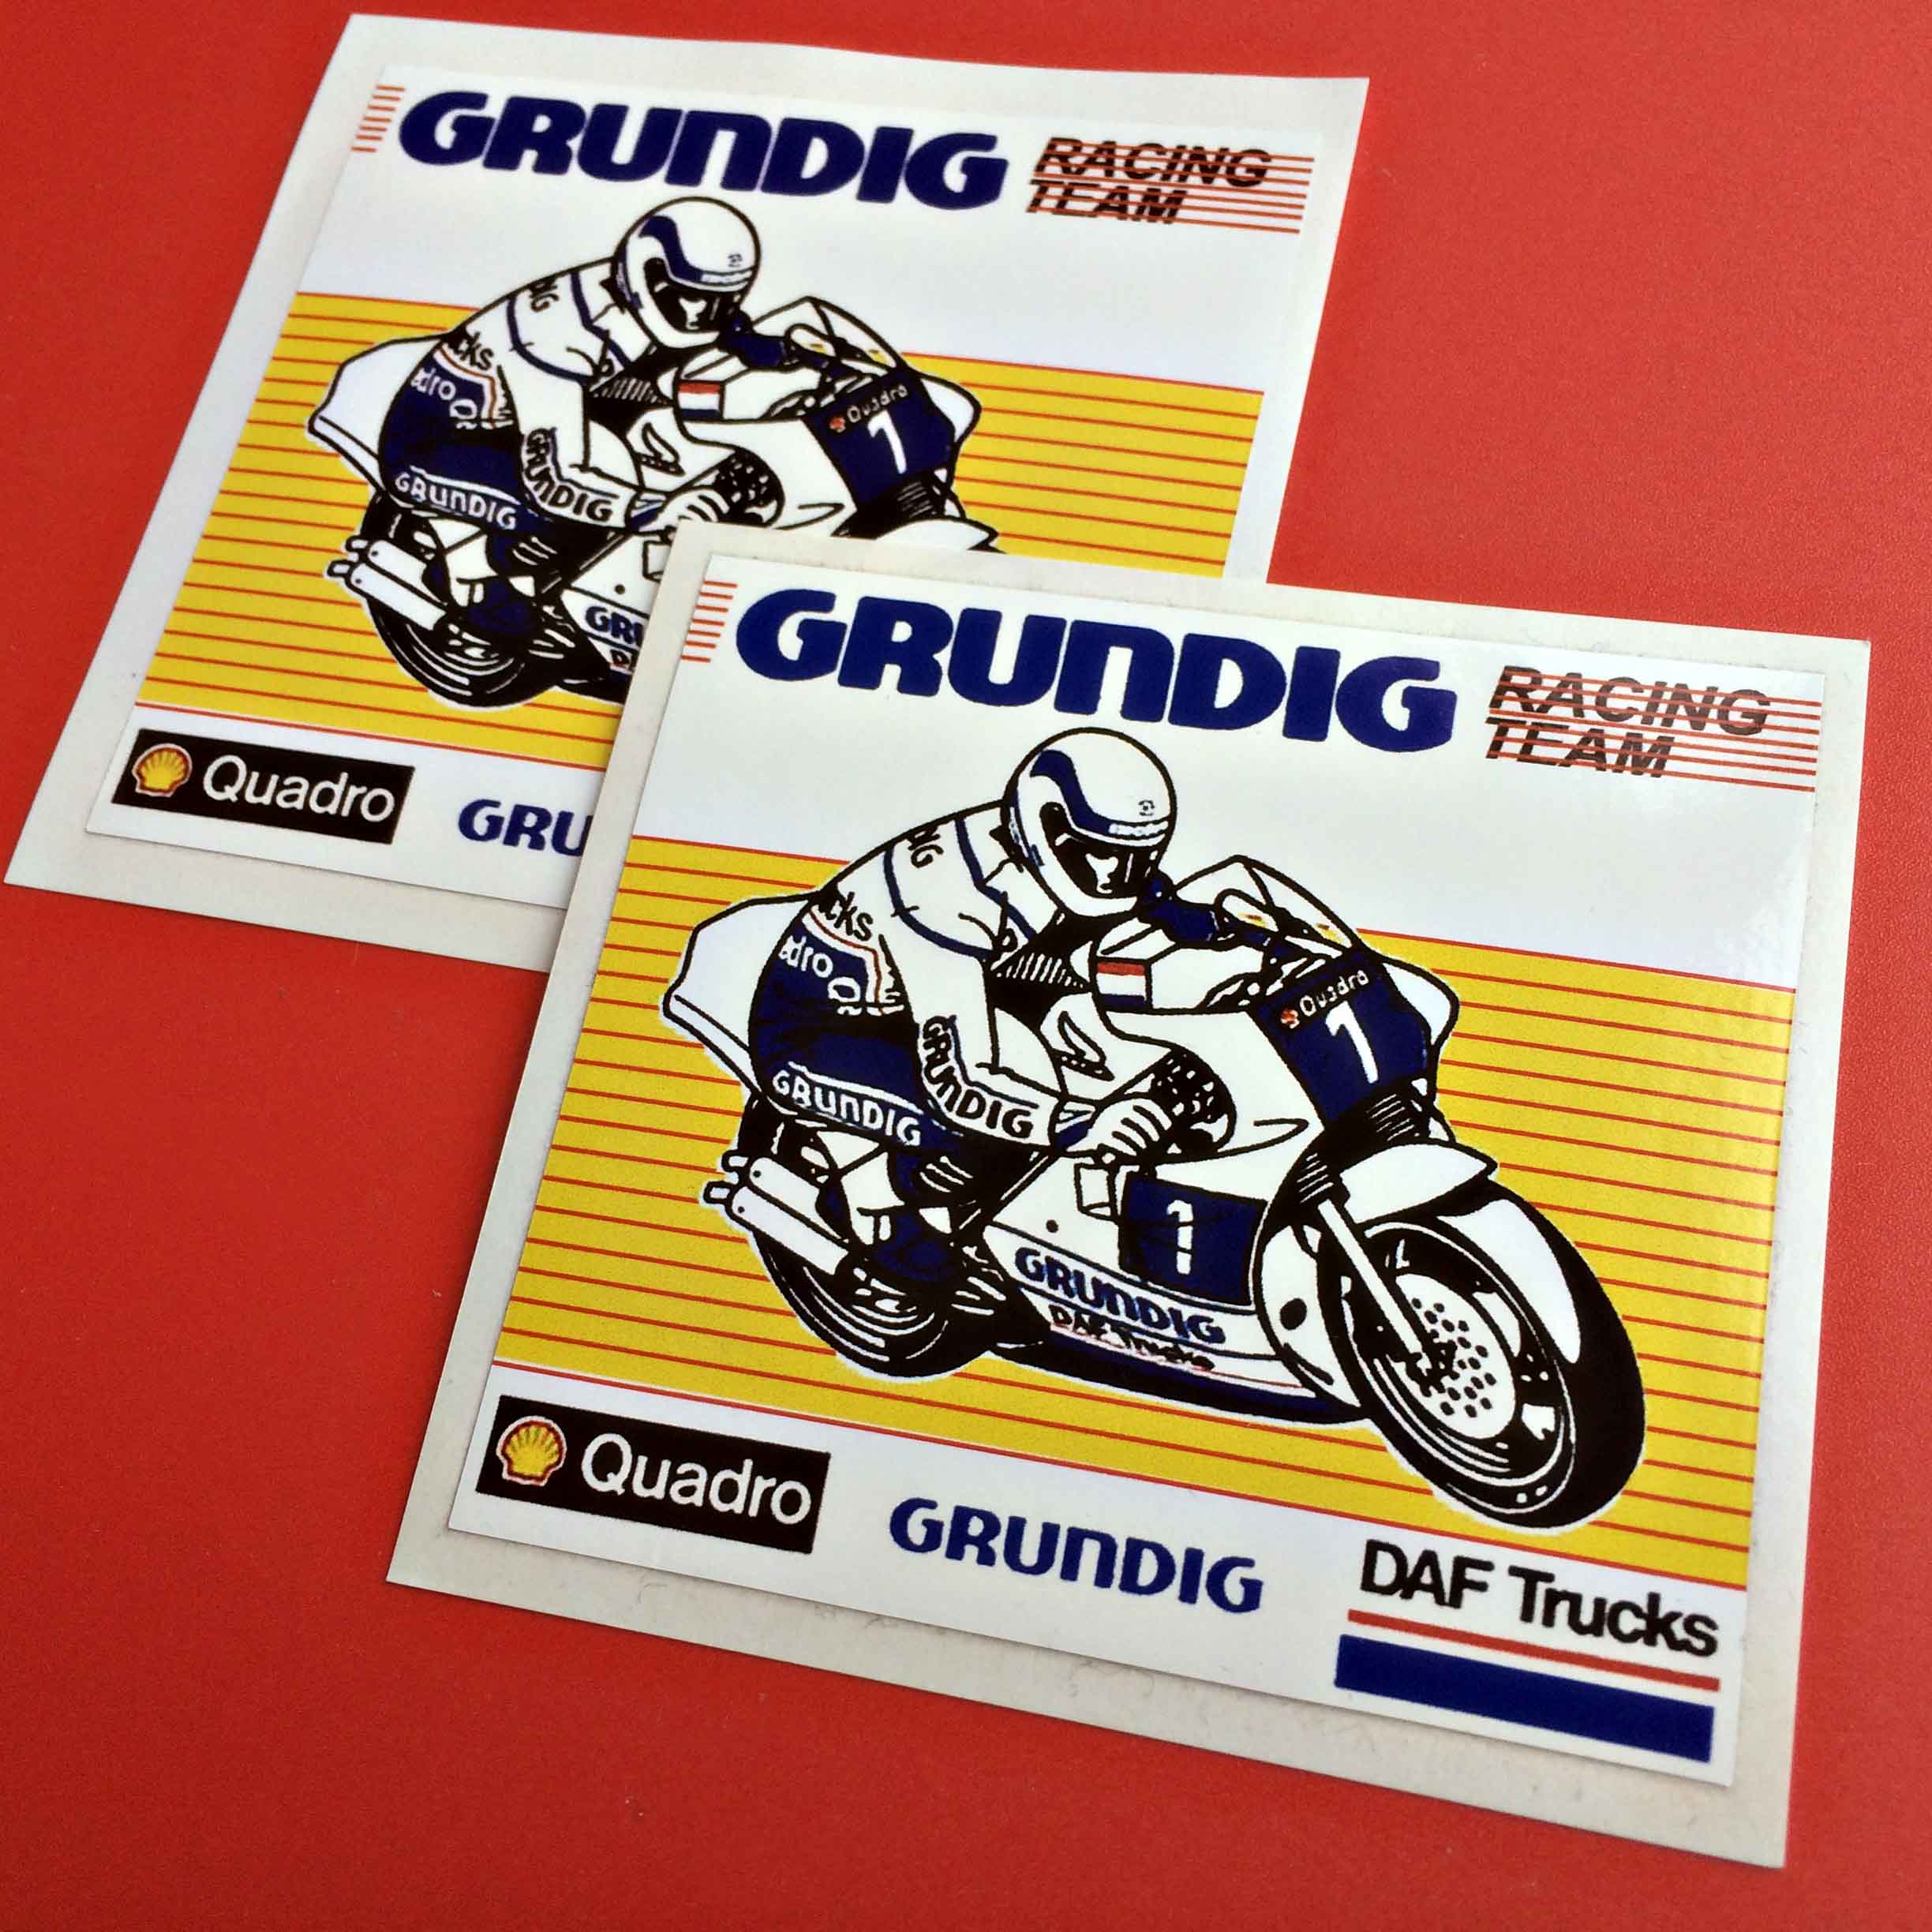 GRUNDIG RACING TEAM STICKERS. A motorcyclist riding a motorbike with the number 1 on the front. They are both in blue and white and emblazoned with advertising. On a yellow background Grundig Racing Team, Quadro and DAF Trucks logos surround them.